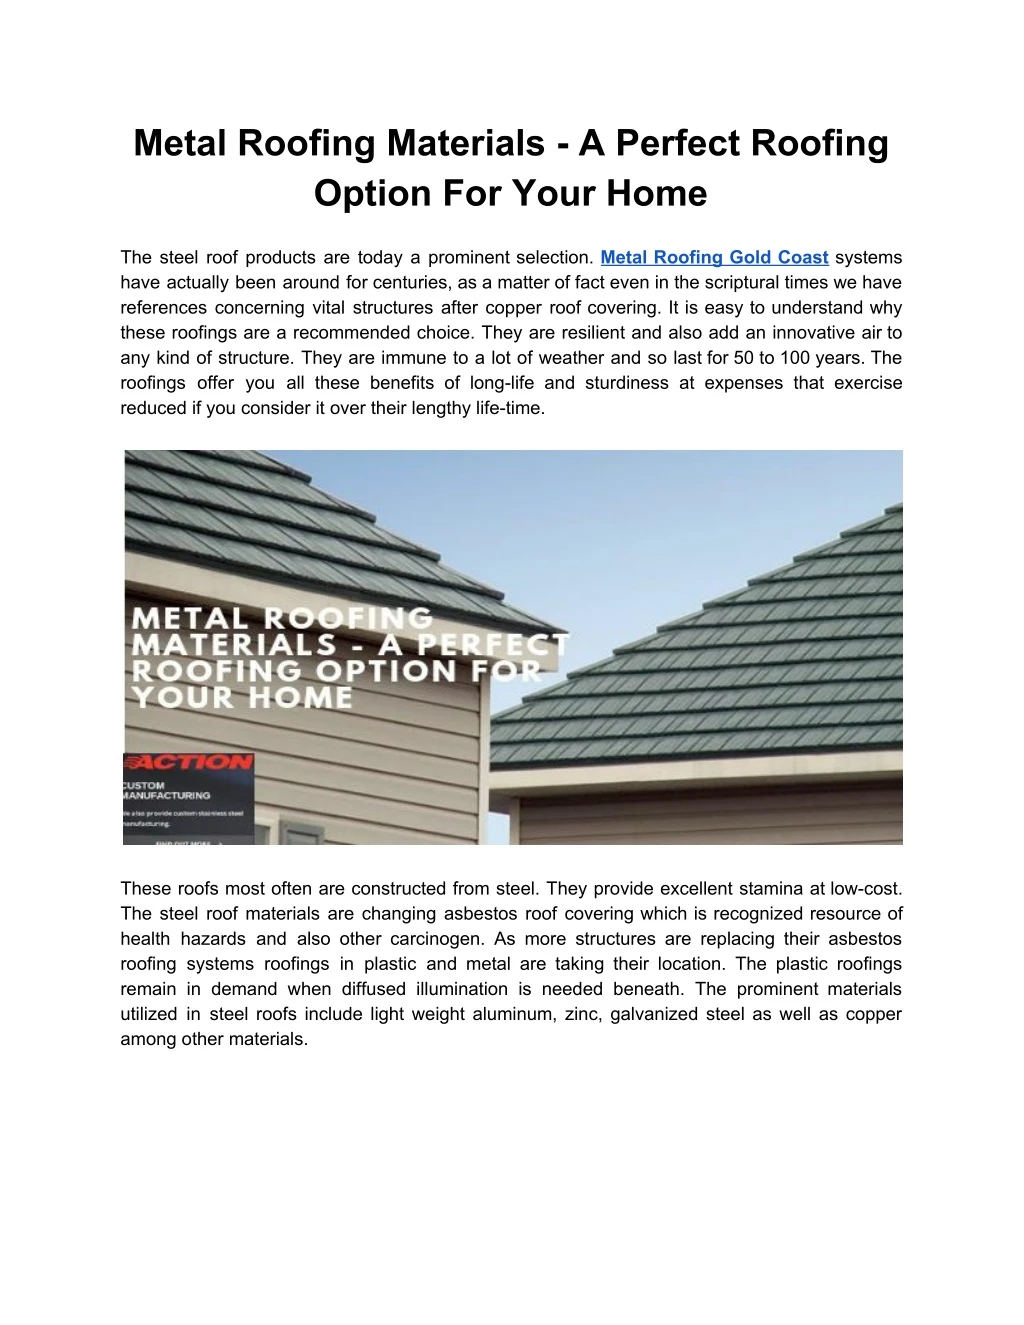 metal roofing materials a perfect roofing option